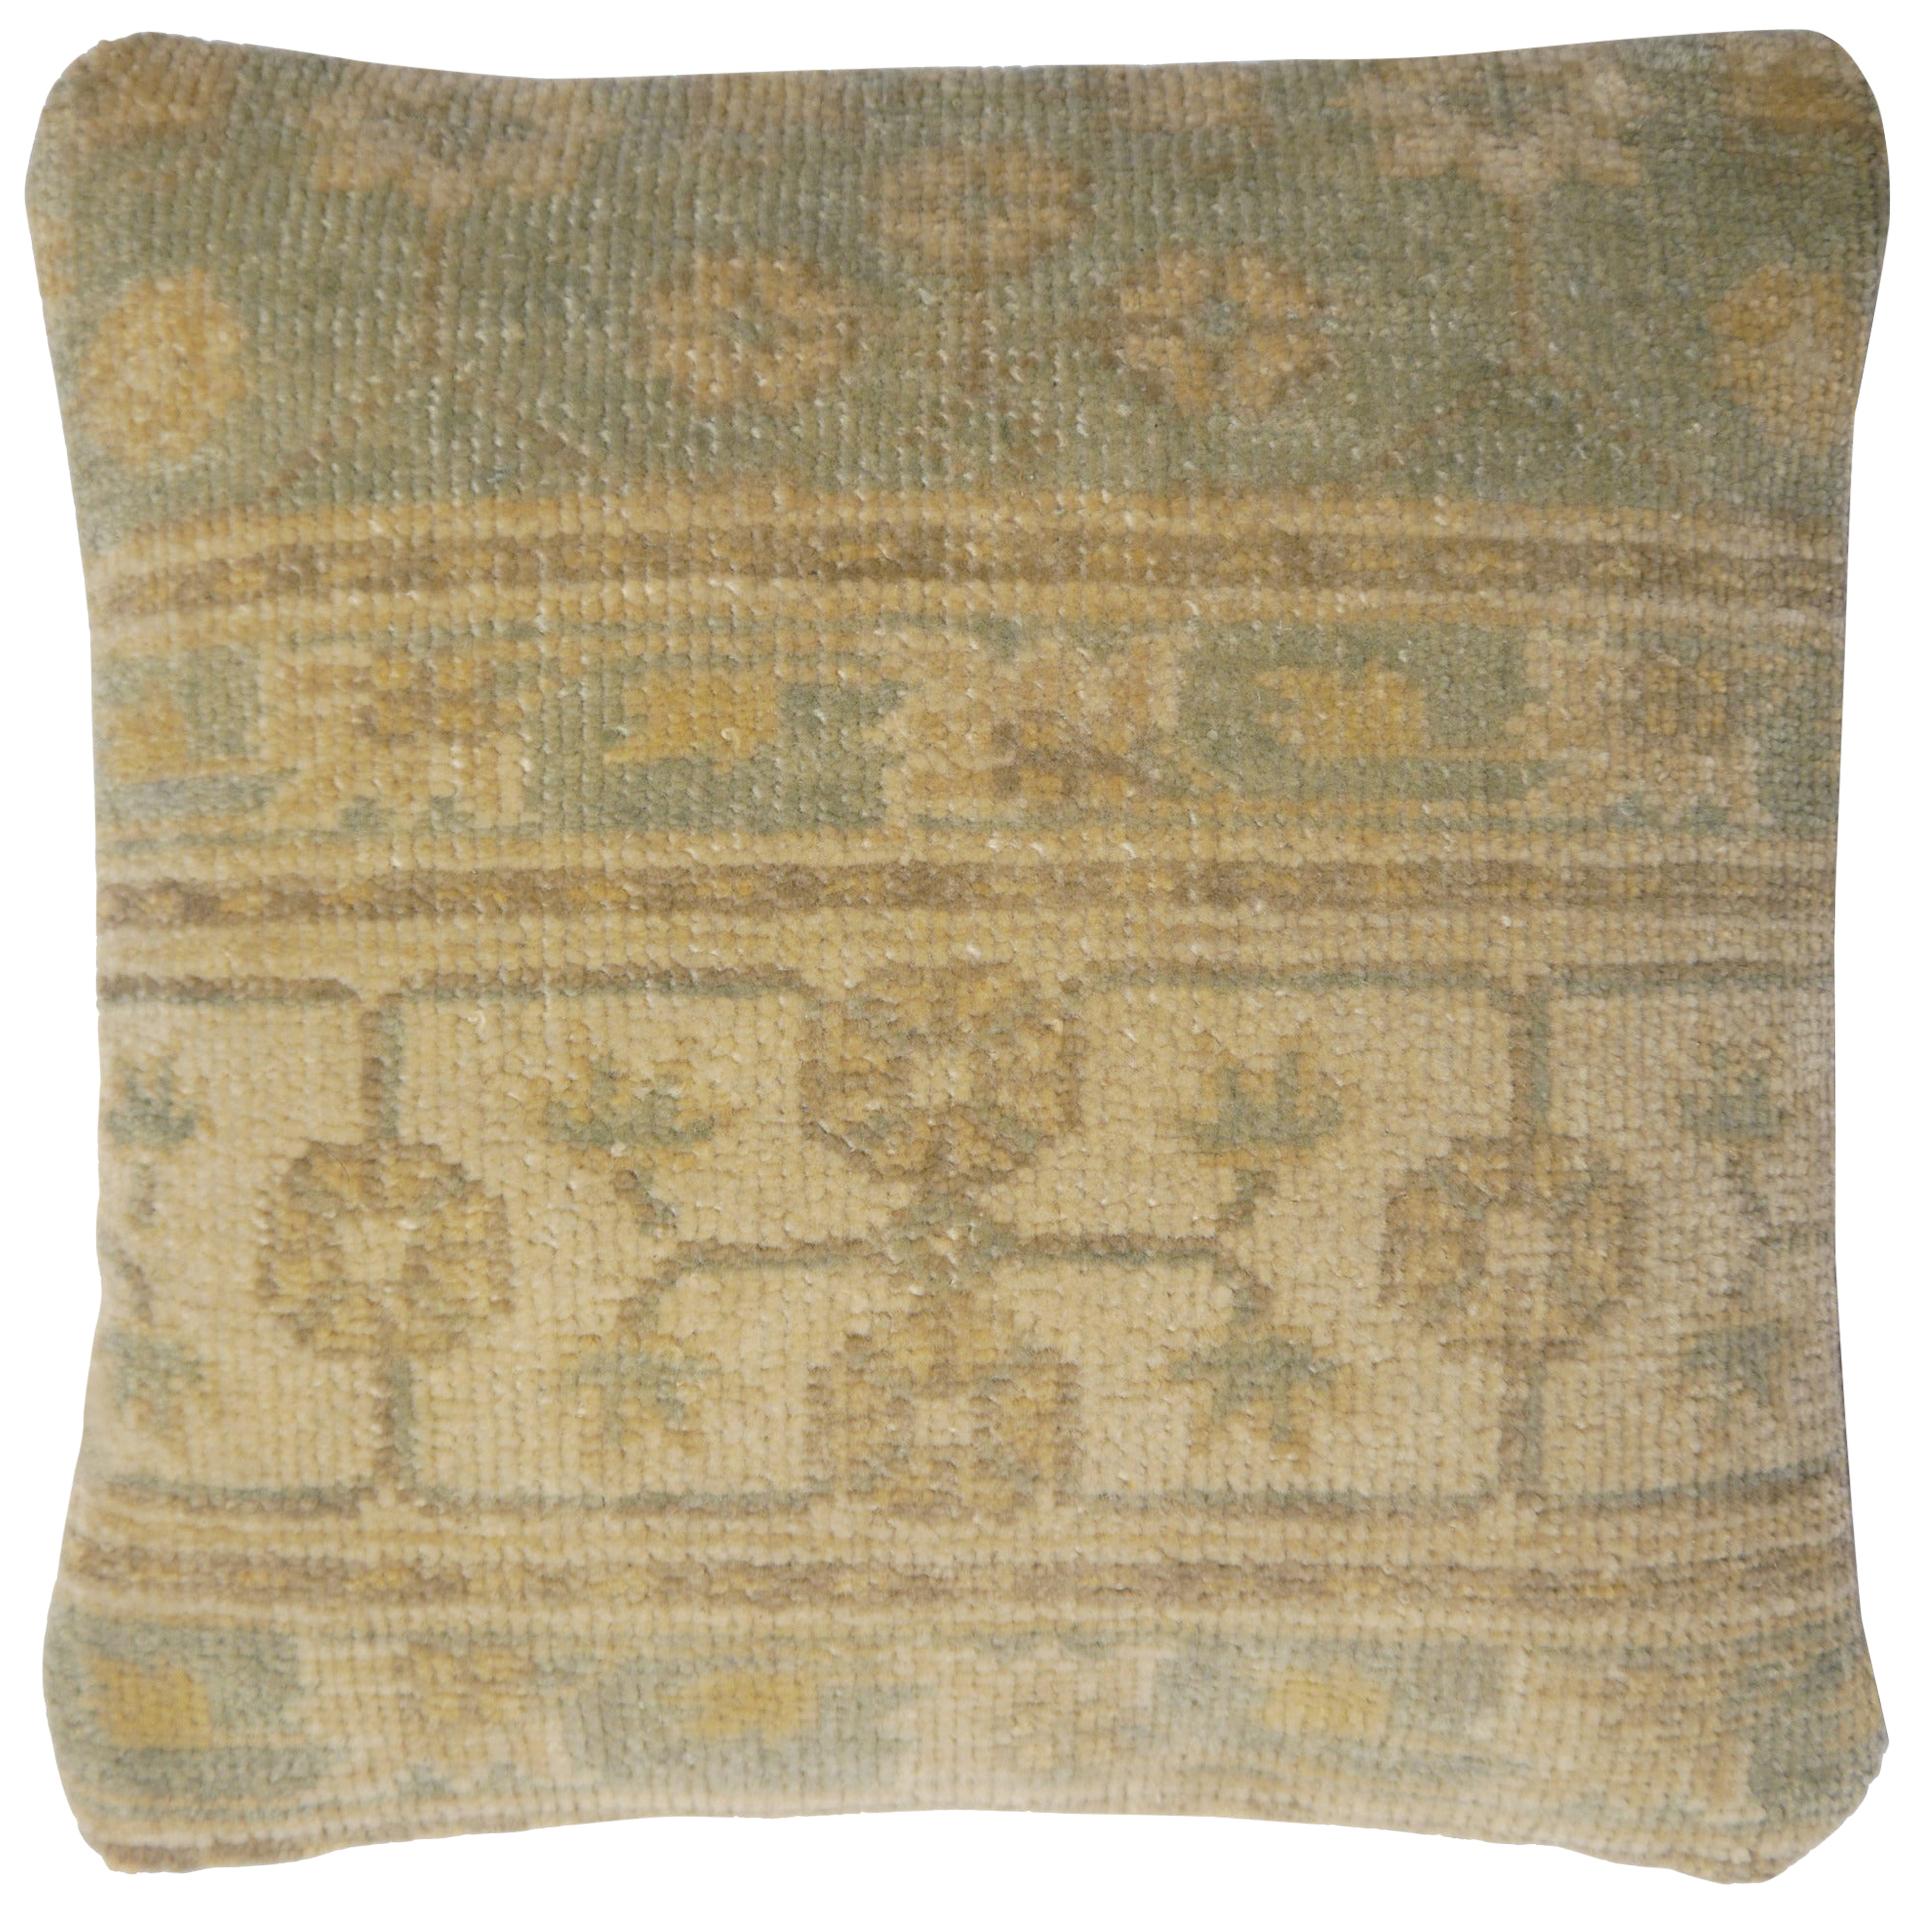 Khotan Samarkand Decorative Hand Knotted Rug Pillow Cover For Sale